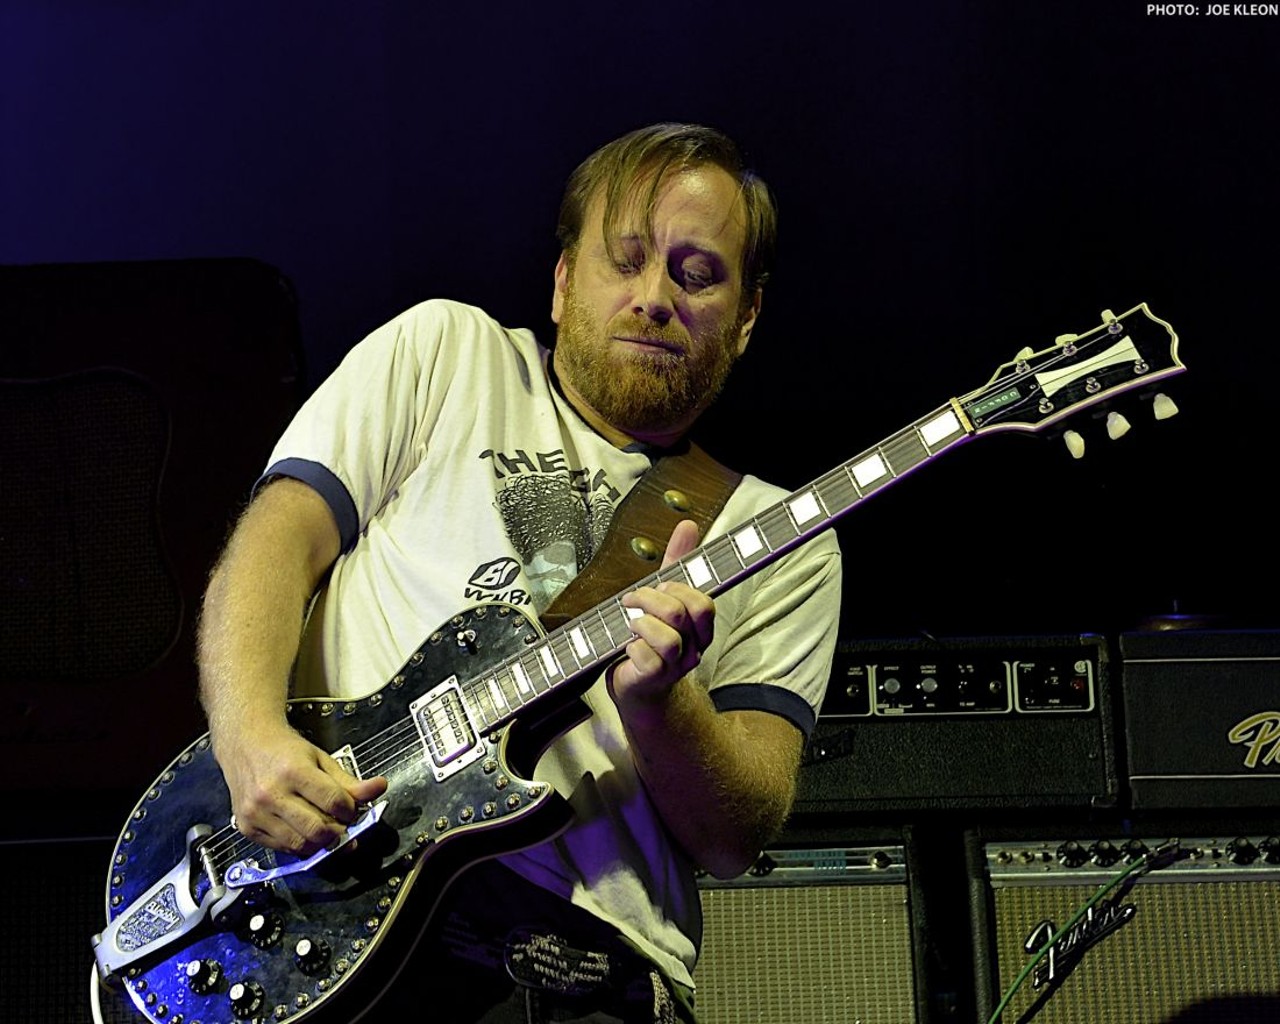 The Black Keys and Modest Mouse Performing at Rocket Mortgage Fieldhouse